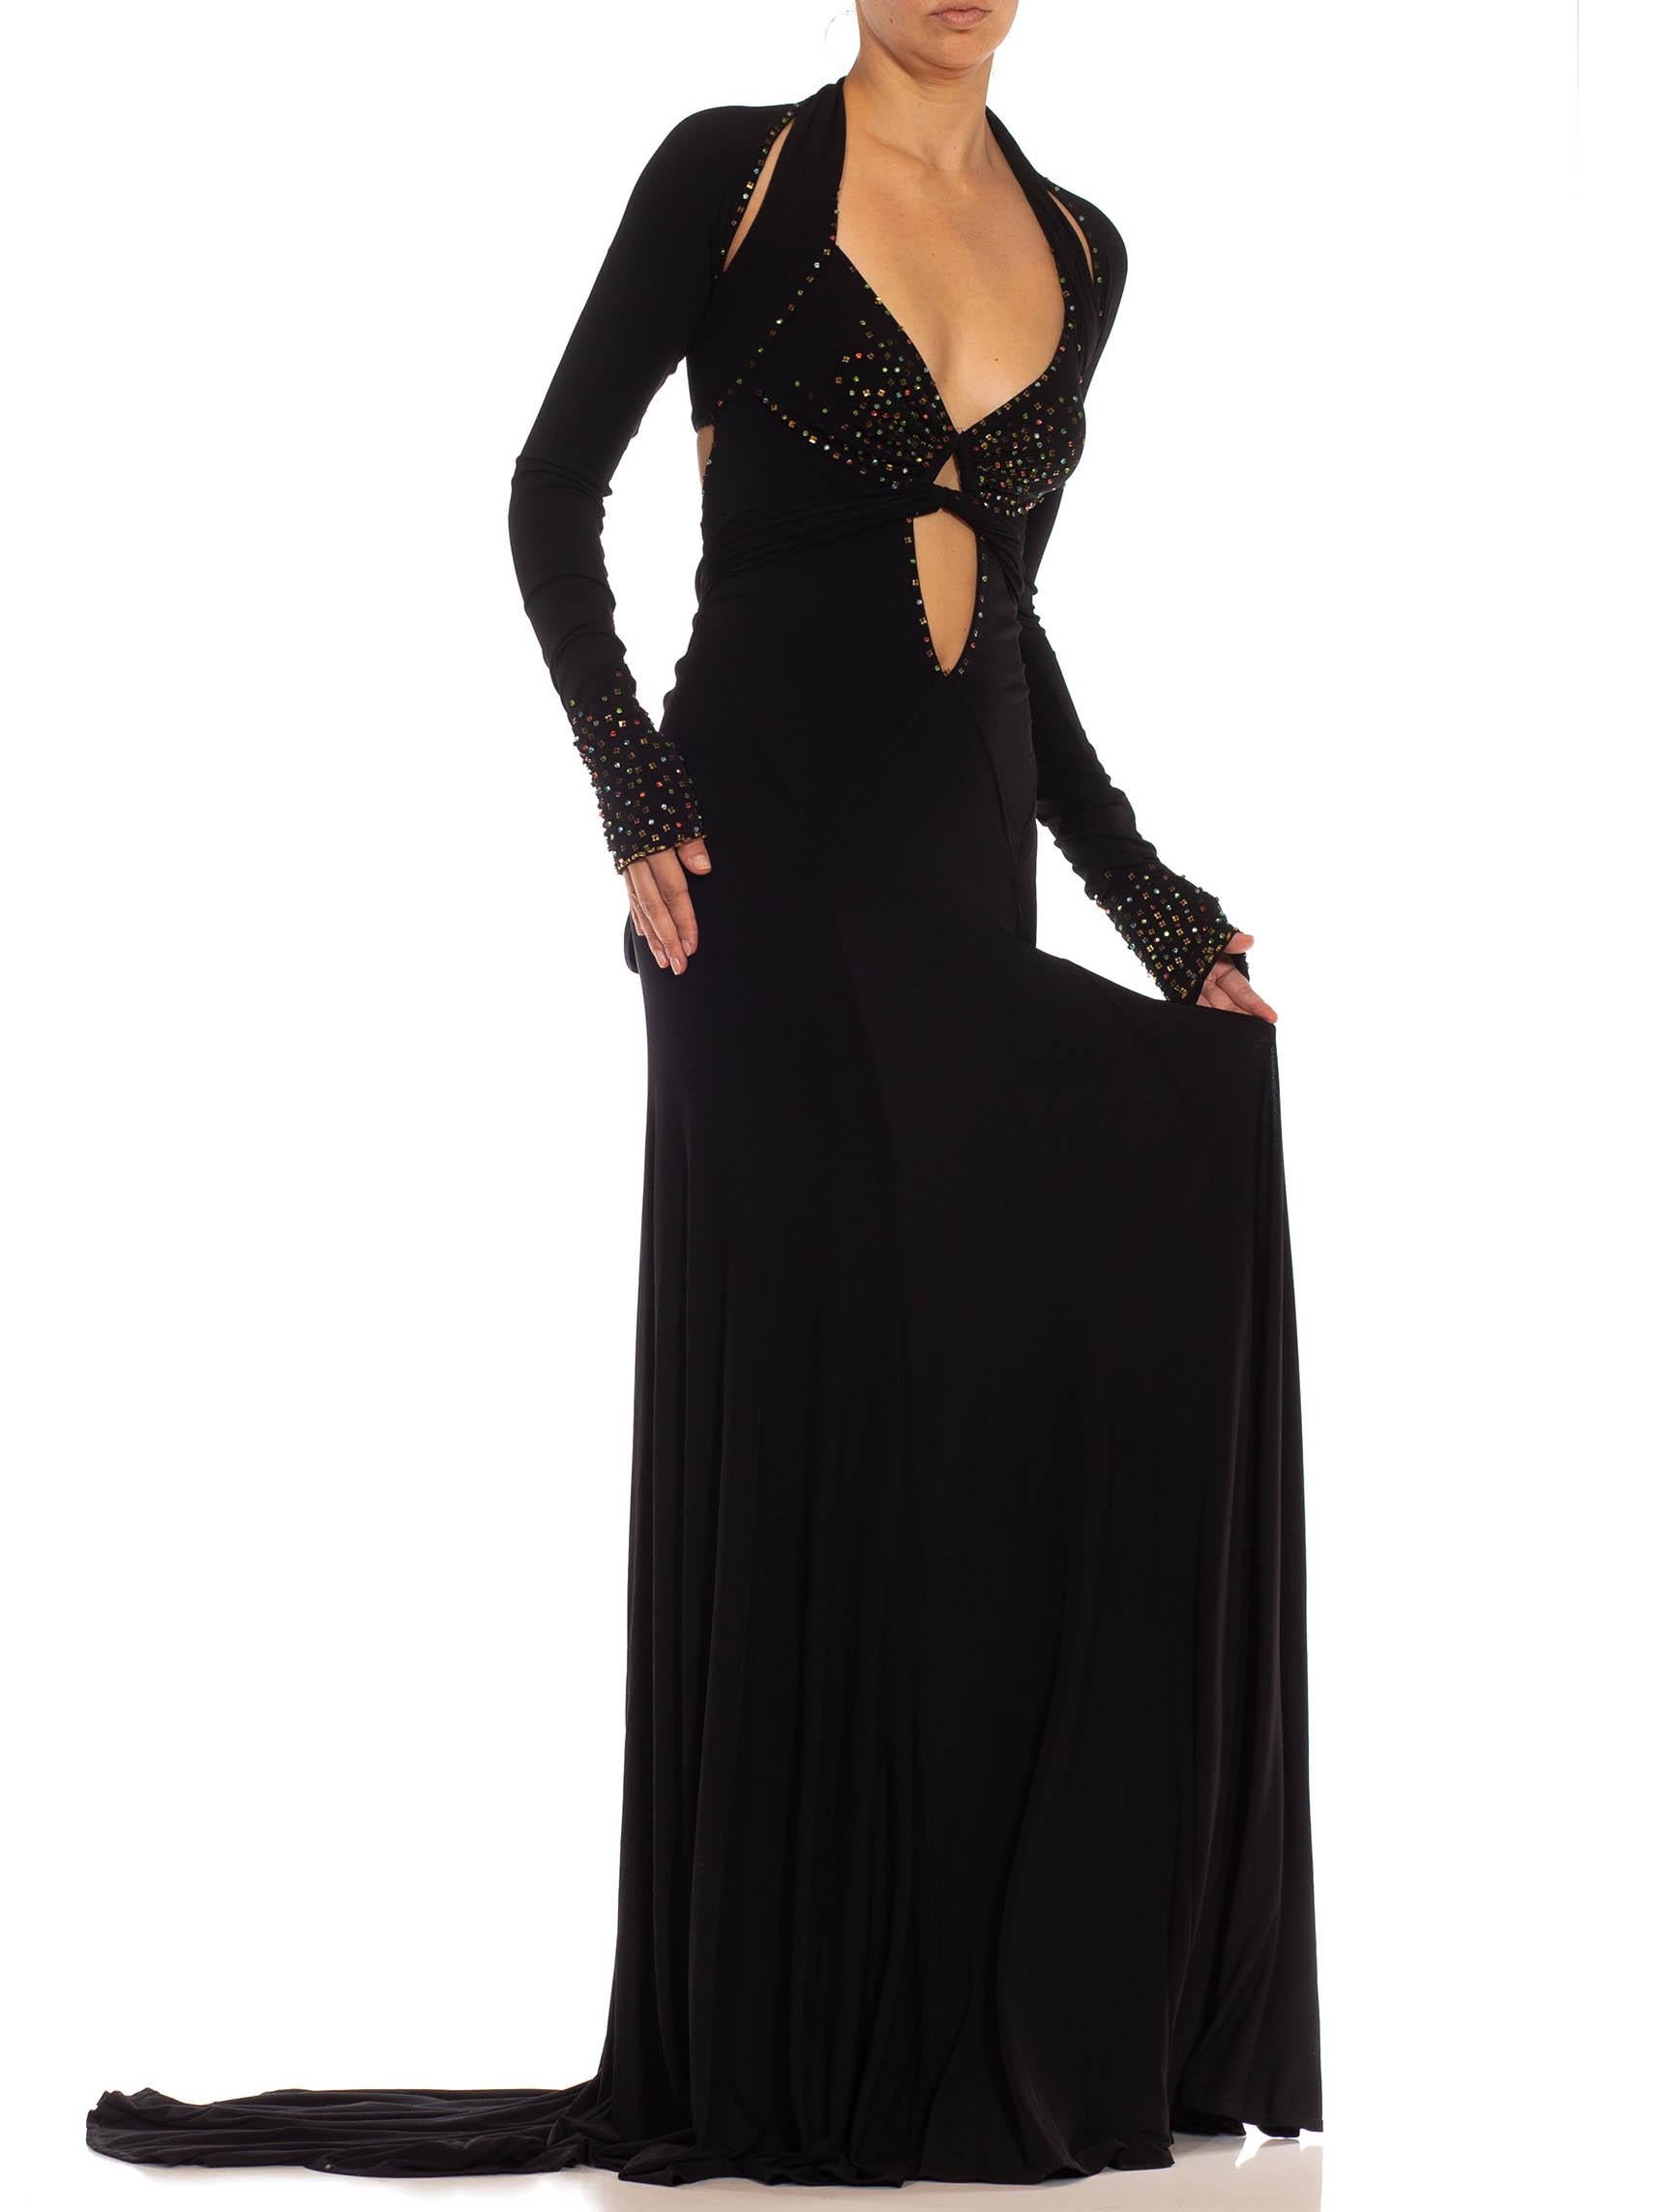 1990S Black Jersey Sexy Slinky Rhinestone Halter Neck Gown With Arm Sleeve Piece For Sale 3